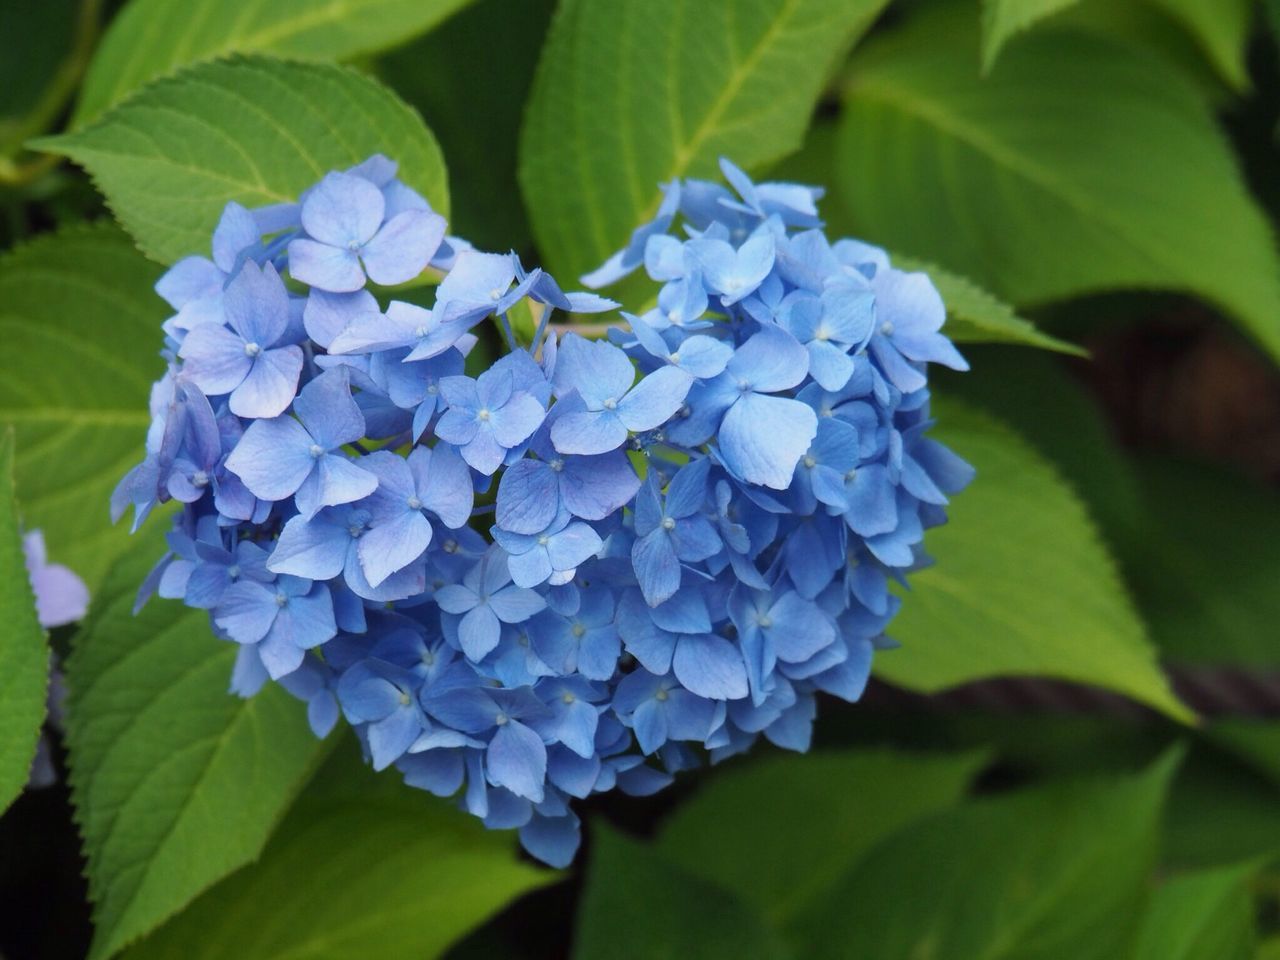 flower, growth, beauty in nature, nature, leaf, plant, fragility, hydrangea, petal, purple, freshness, blue, green color, flower head, day, blooming, no people, outdoors, close-up